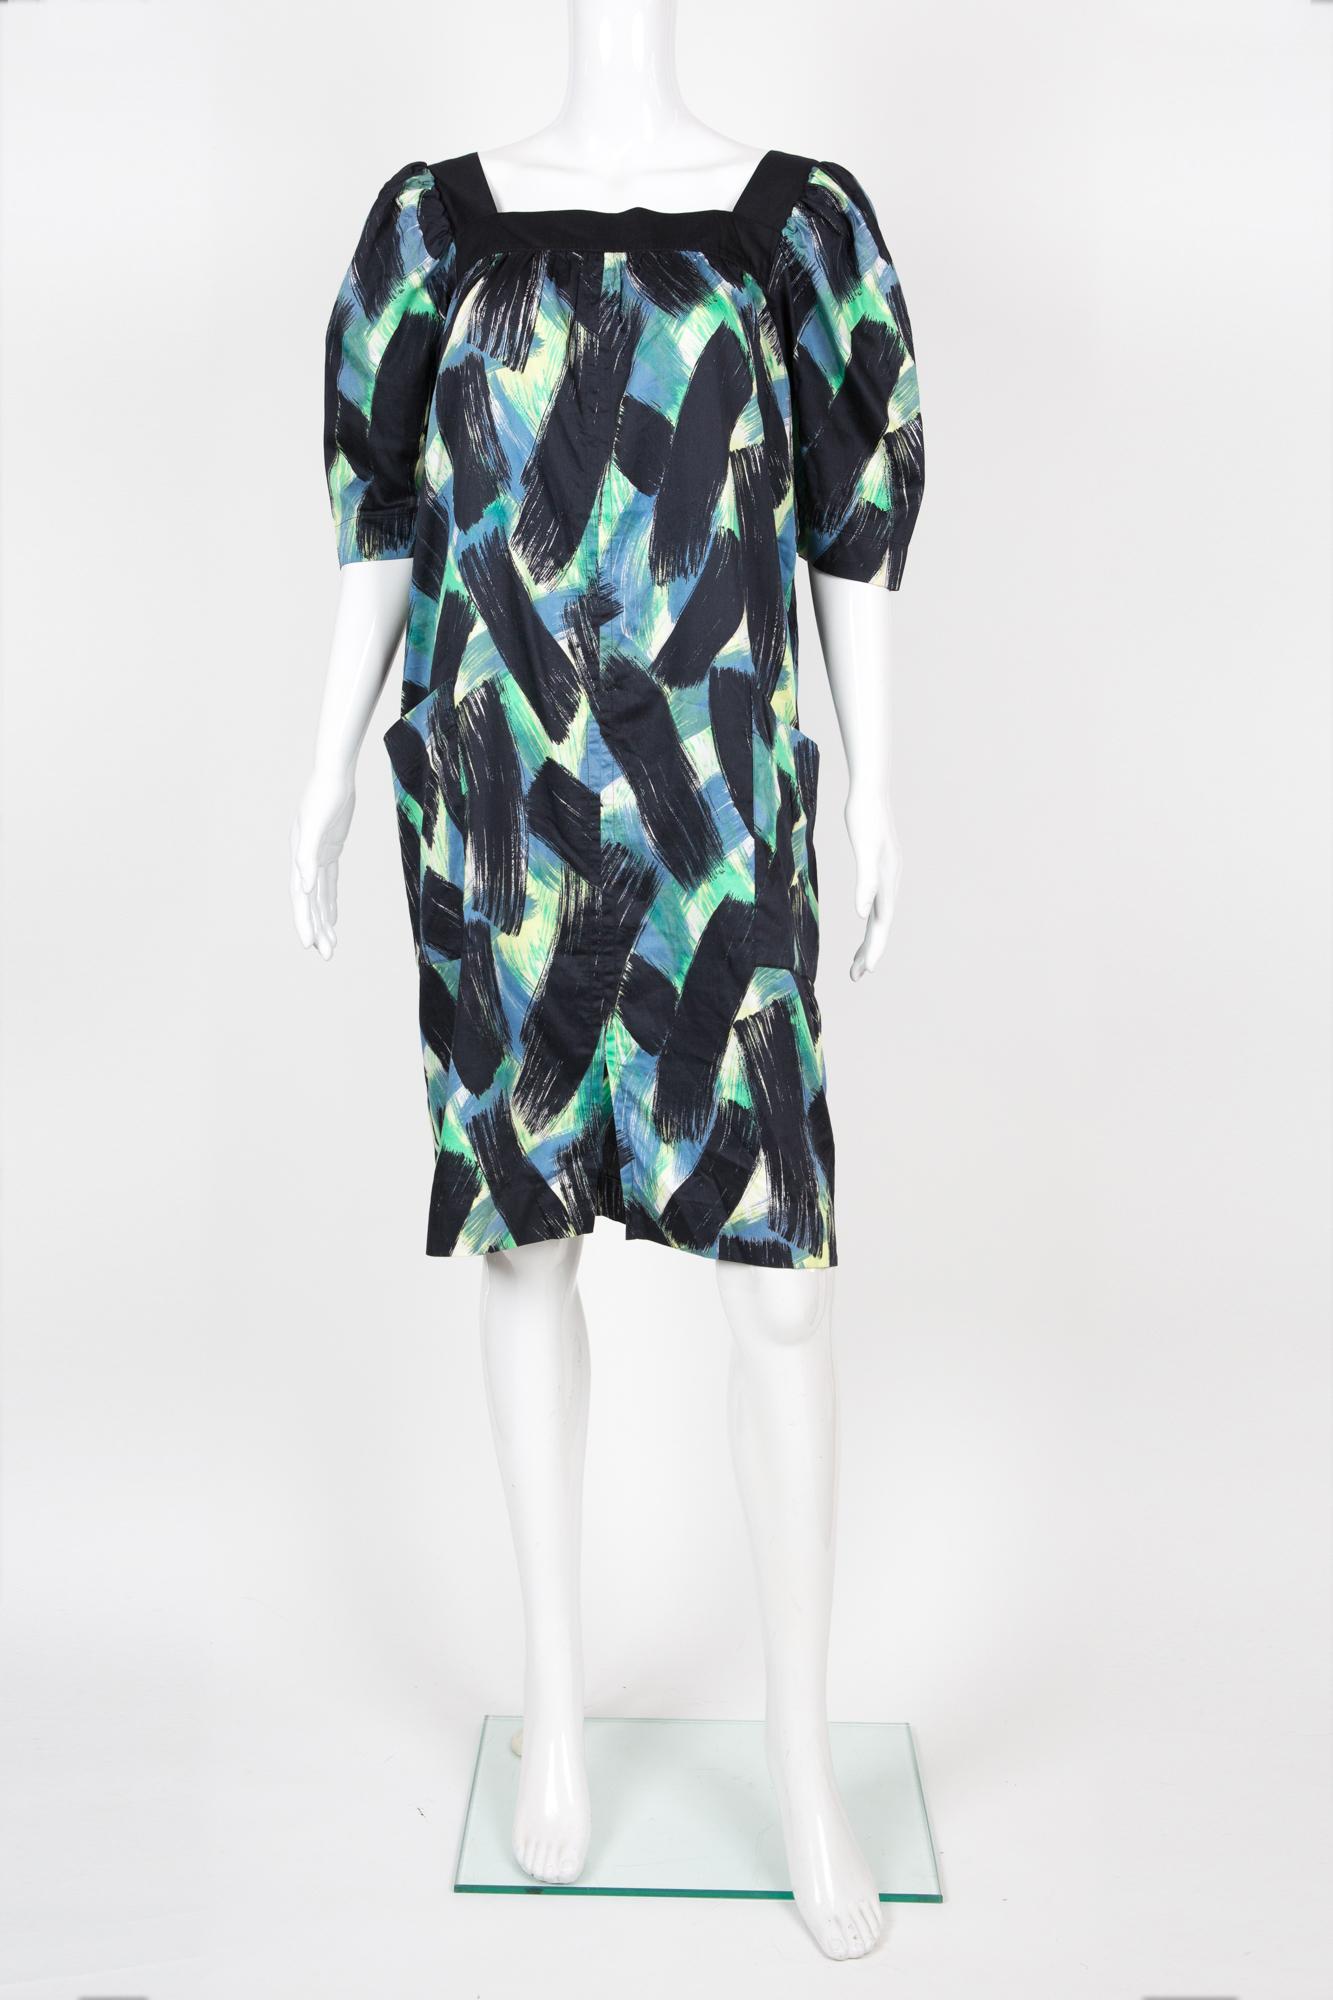 Yves Saint Laurent YSL cotton printed dress featuring a graphic print, black cotton finishing, pocket at sides, center back slits.
Circa 1990s
Composition: 100% cotton
Estimated size 38fr/US6 /UK10
Made in France. 
In good vintage condition. 
We